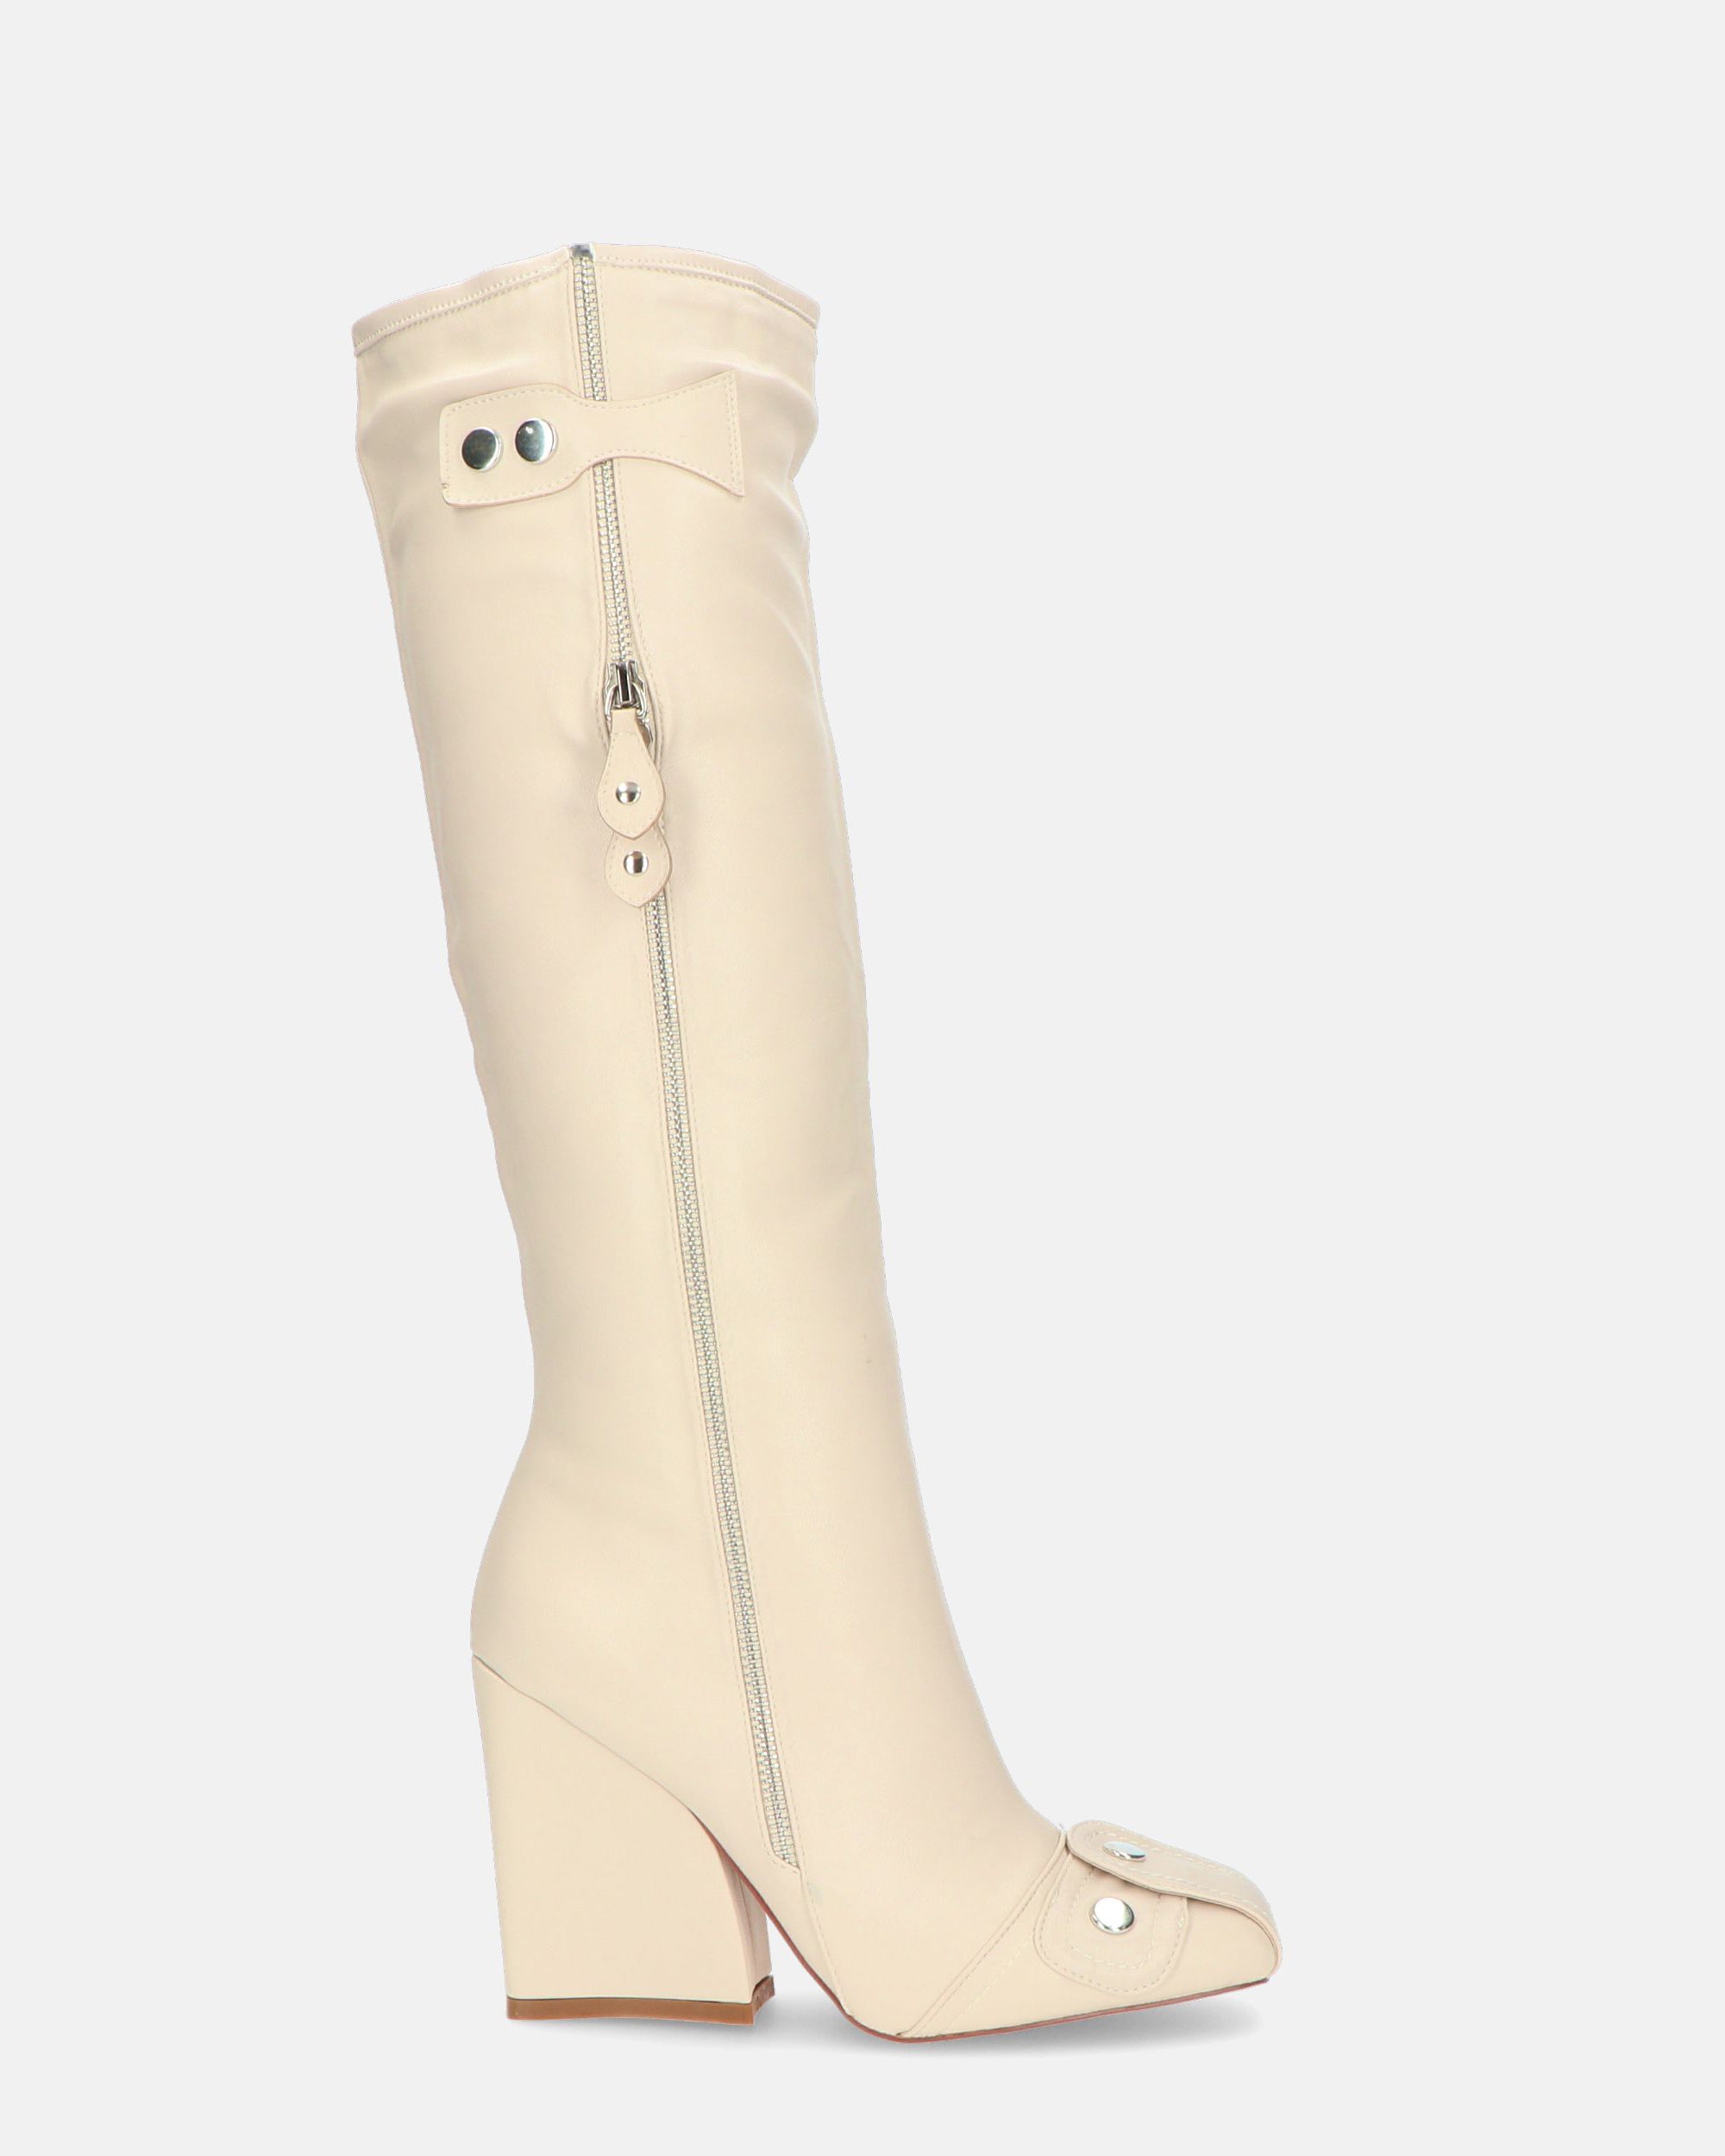 DEVA - beige high boots with zippers and square heel